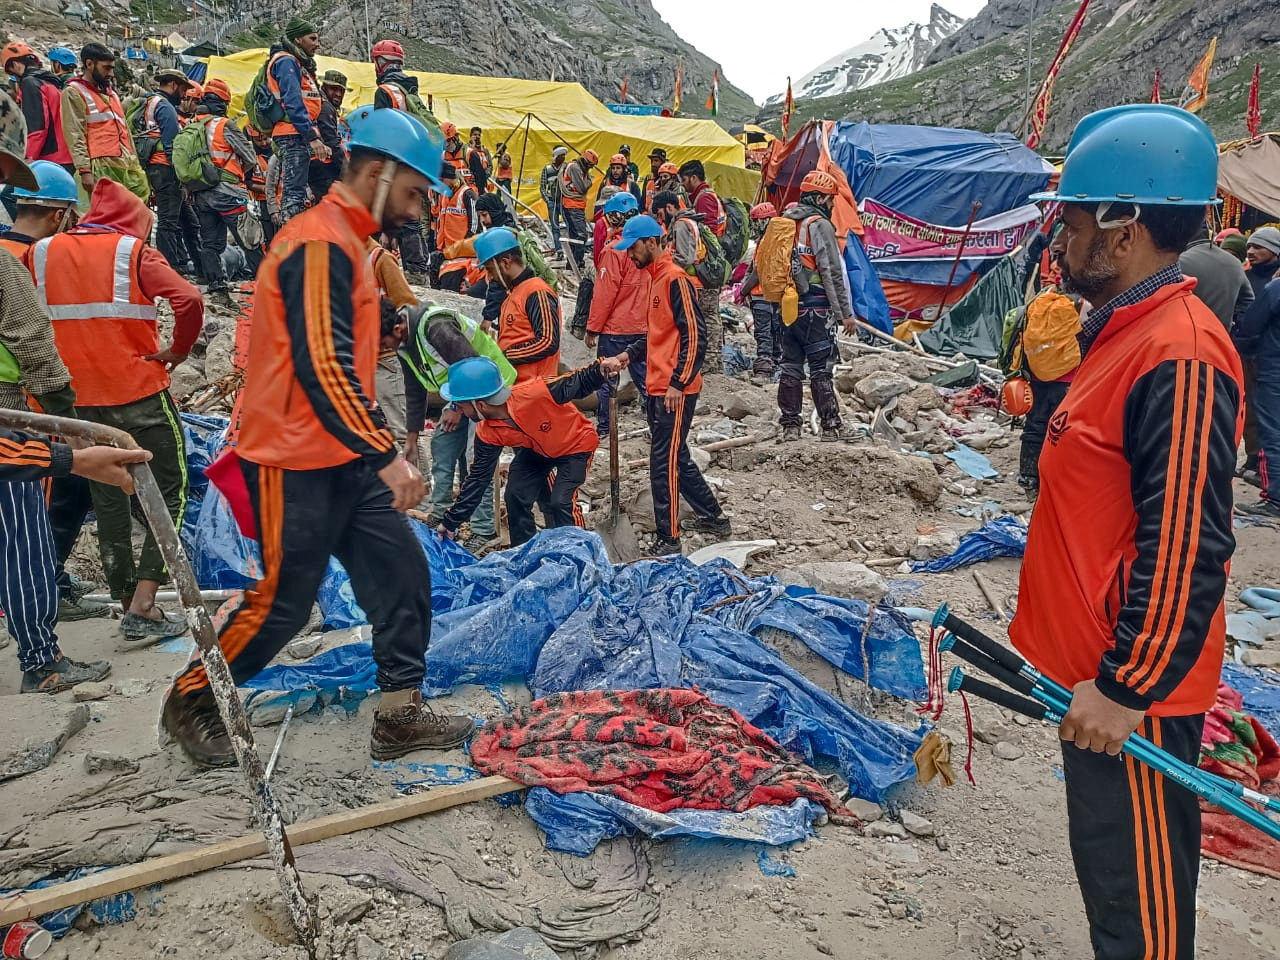 Rescuers search for survivors following a cloudburst near the holy Amarnath cave shrine in Kashmir